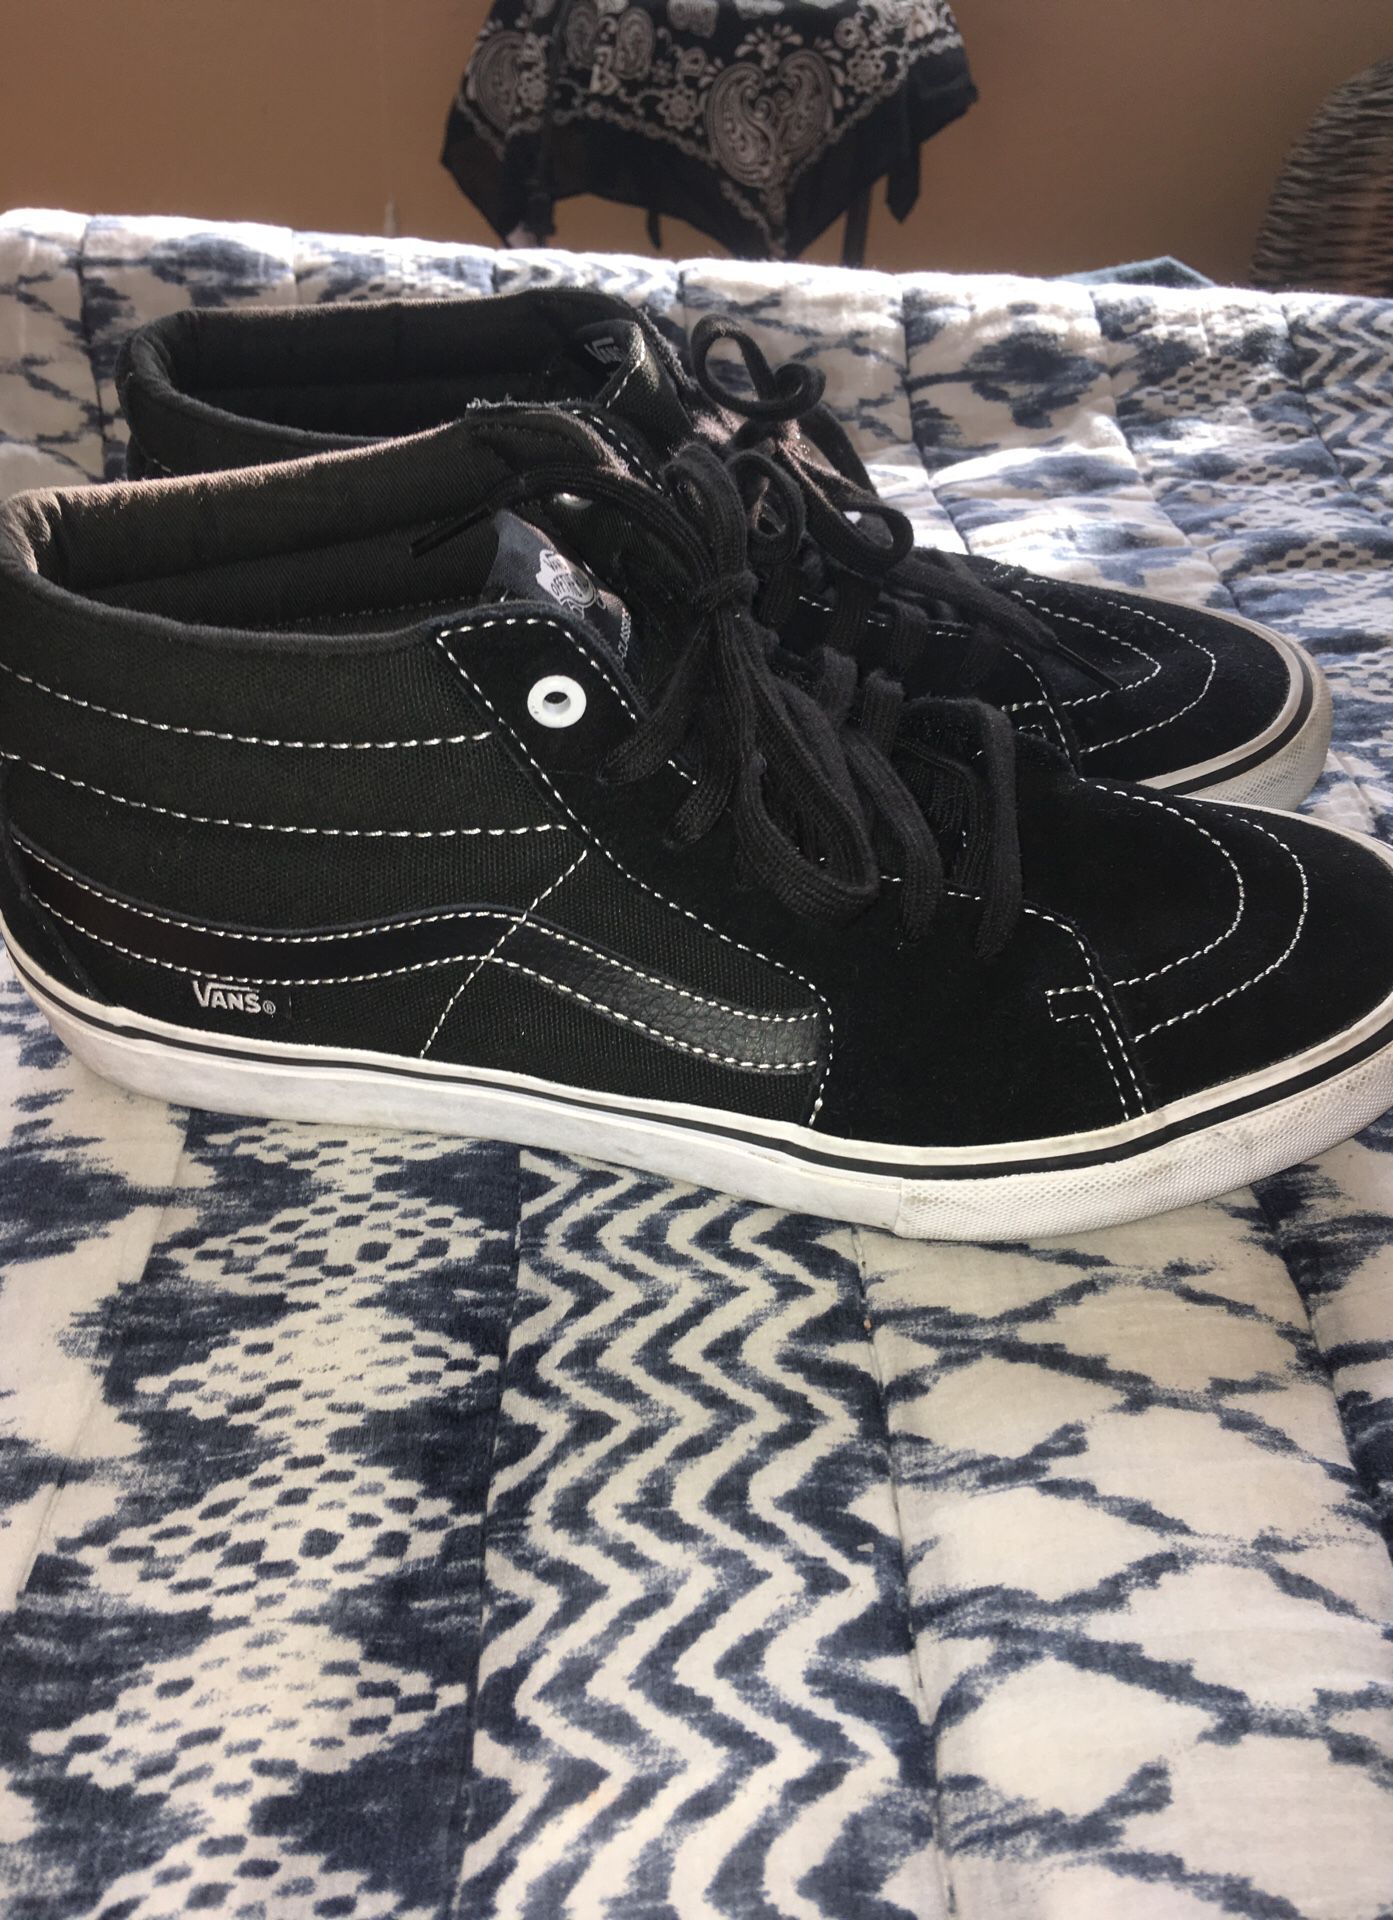 Vans shoes size 11 20$ OBO in great condition